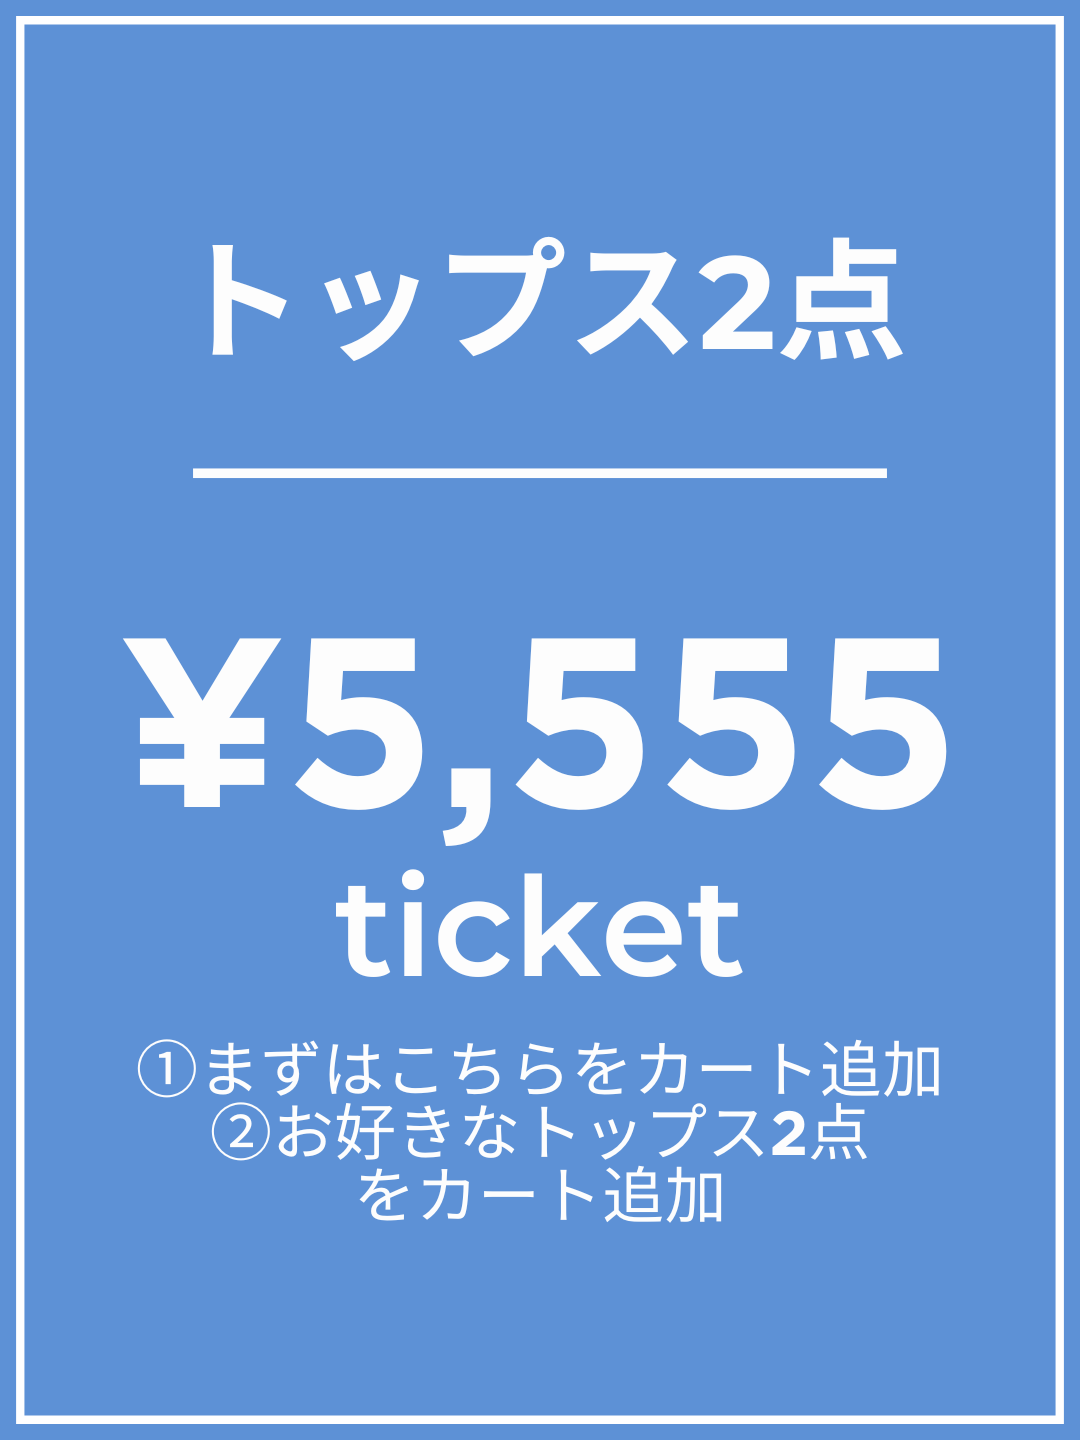 [Add this to your cart first] ¥5,555 ticket